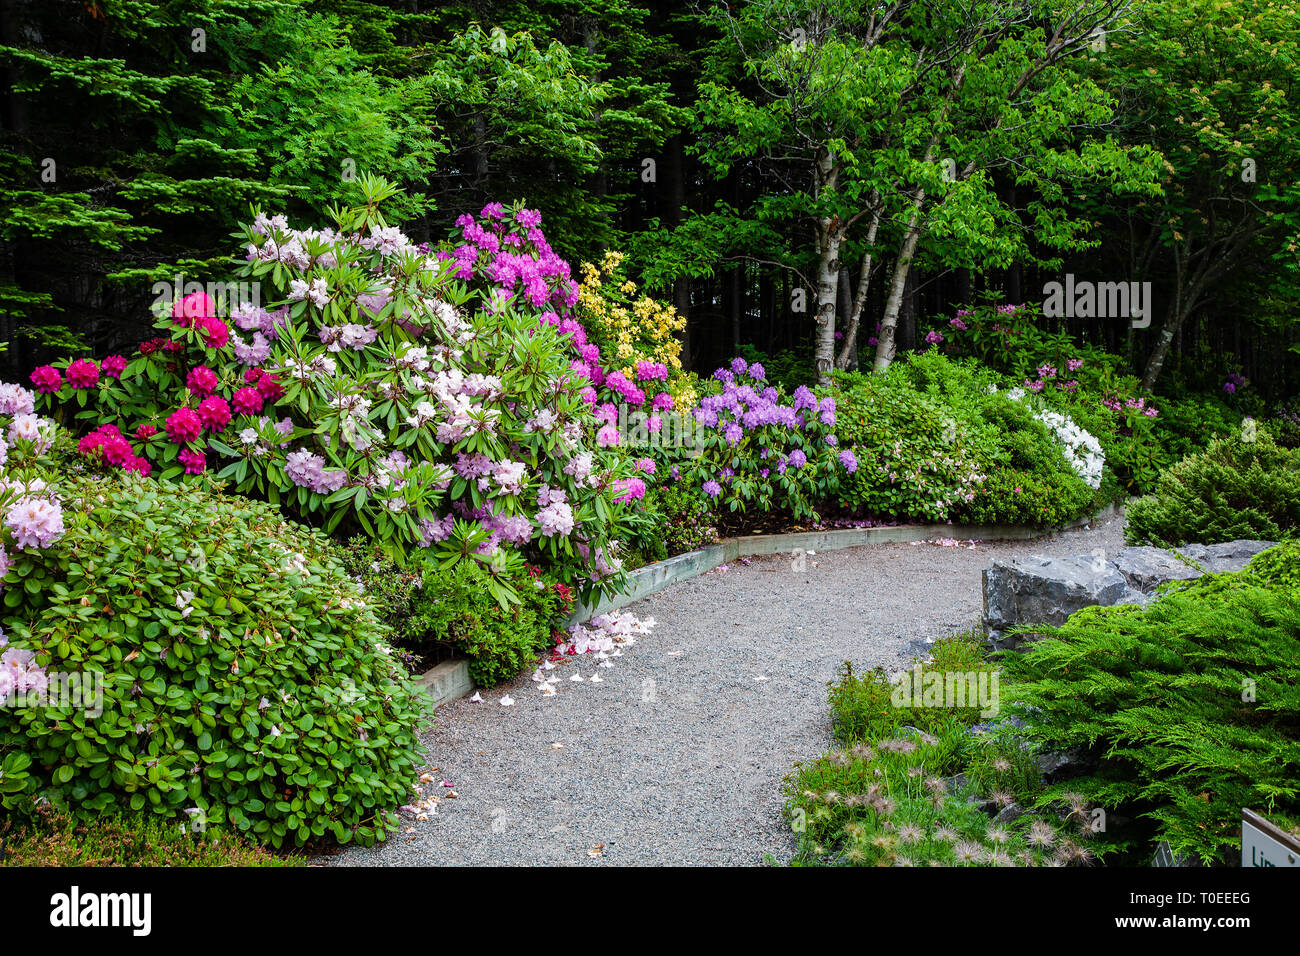 Beautiful shrub bed with azaleas and rhododendrons. Stock Photo